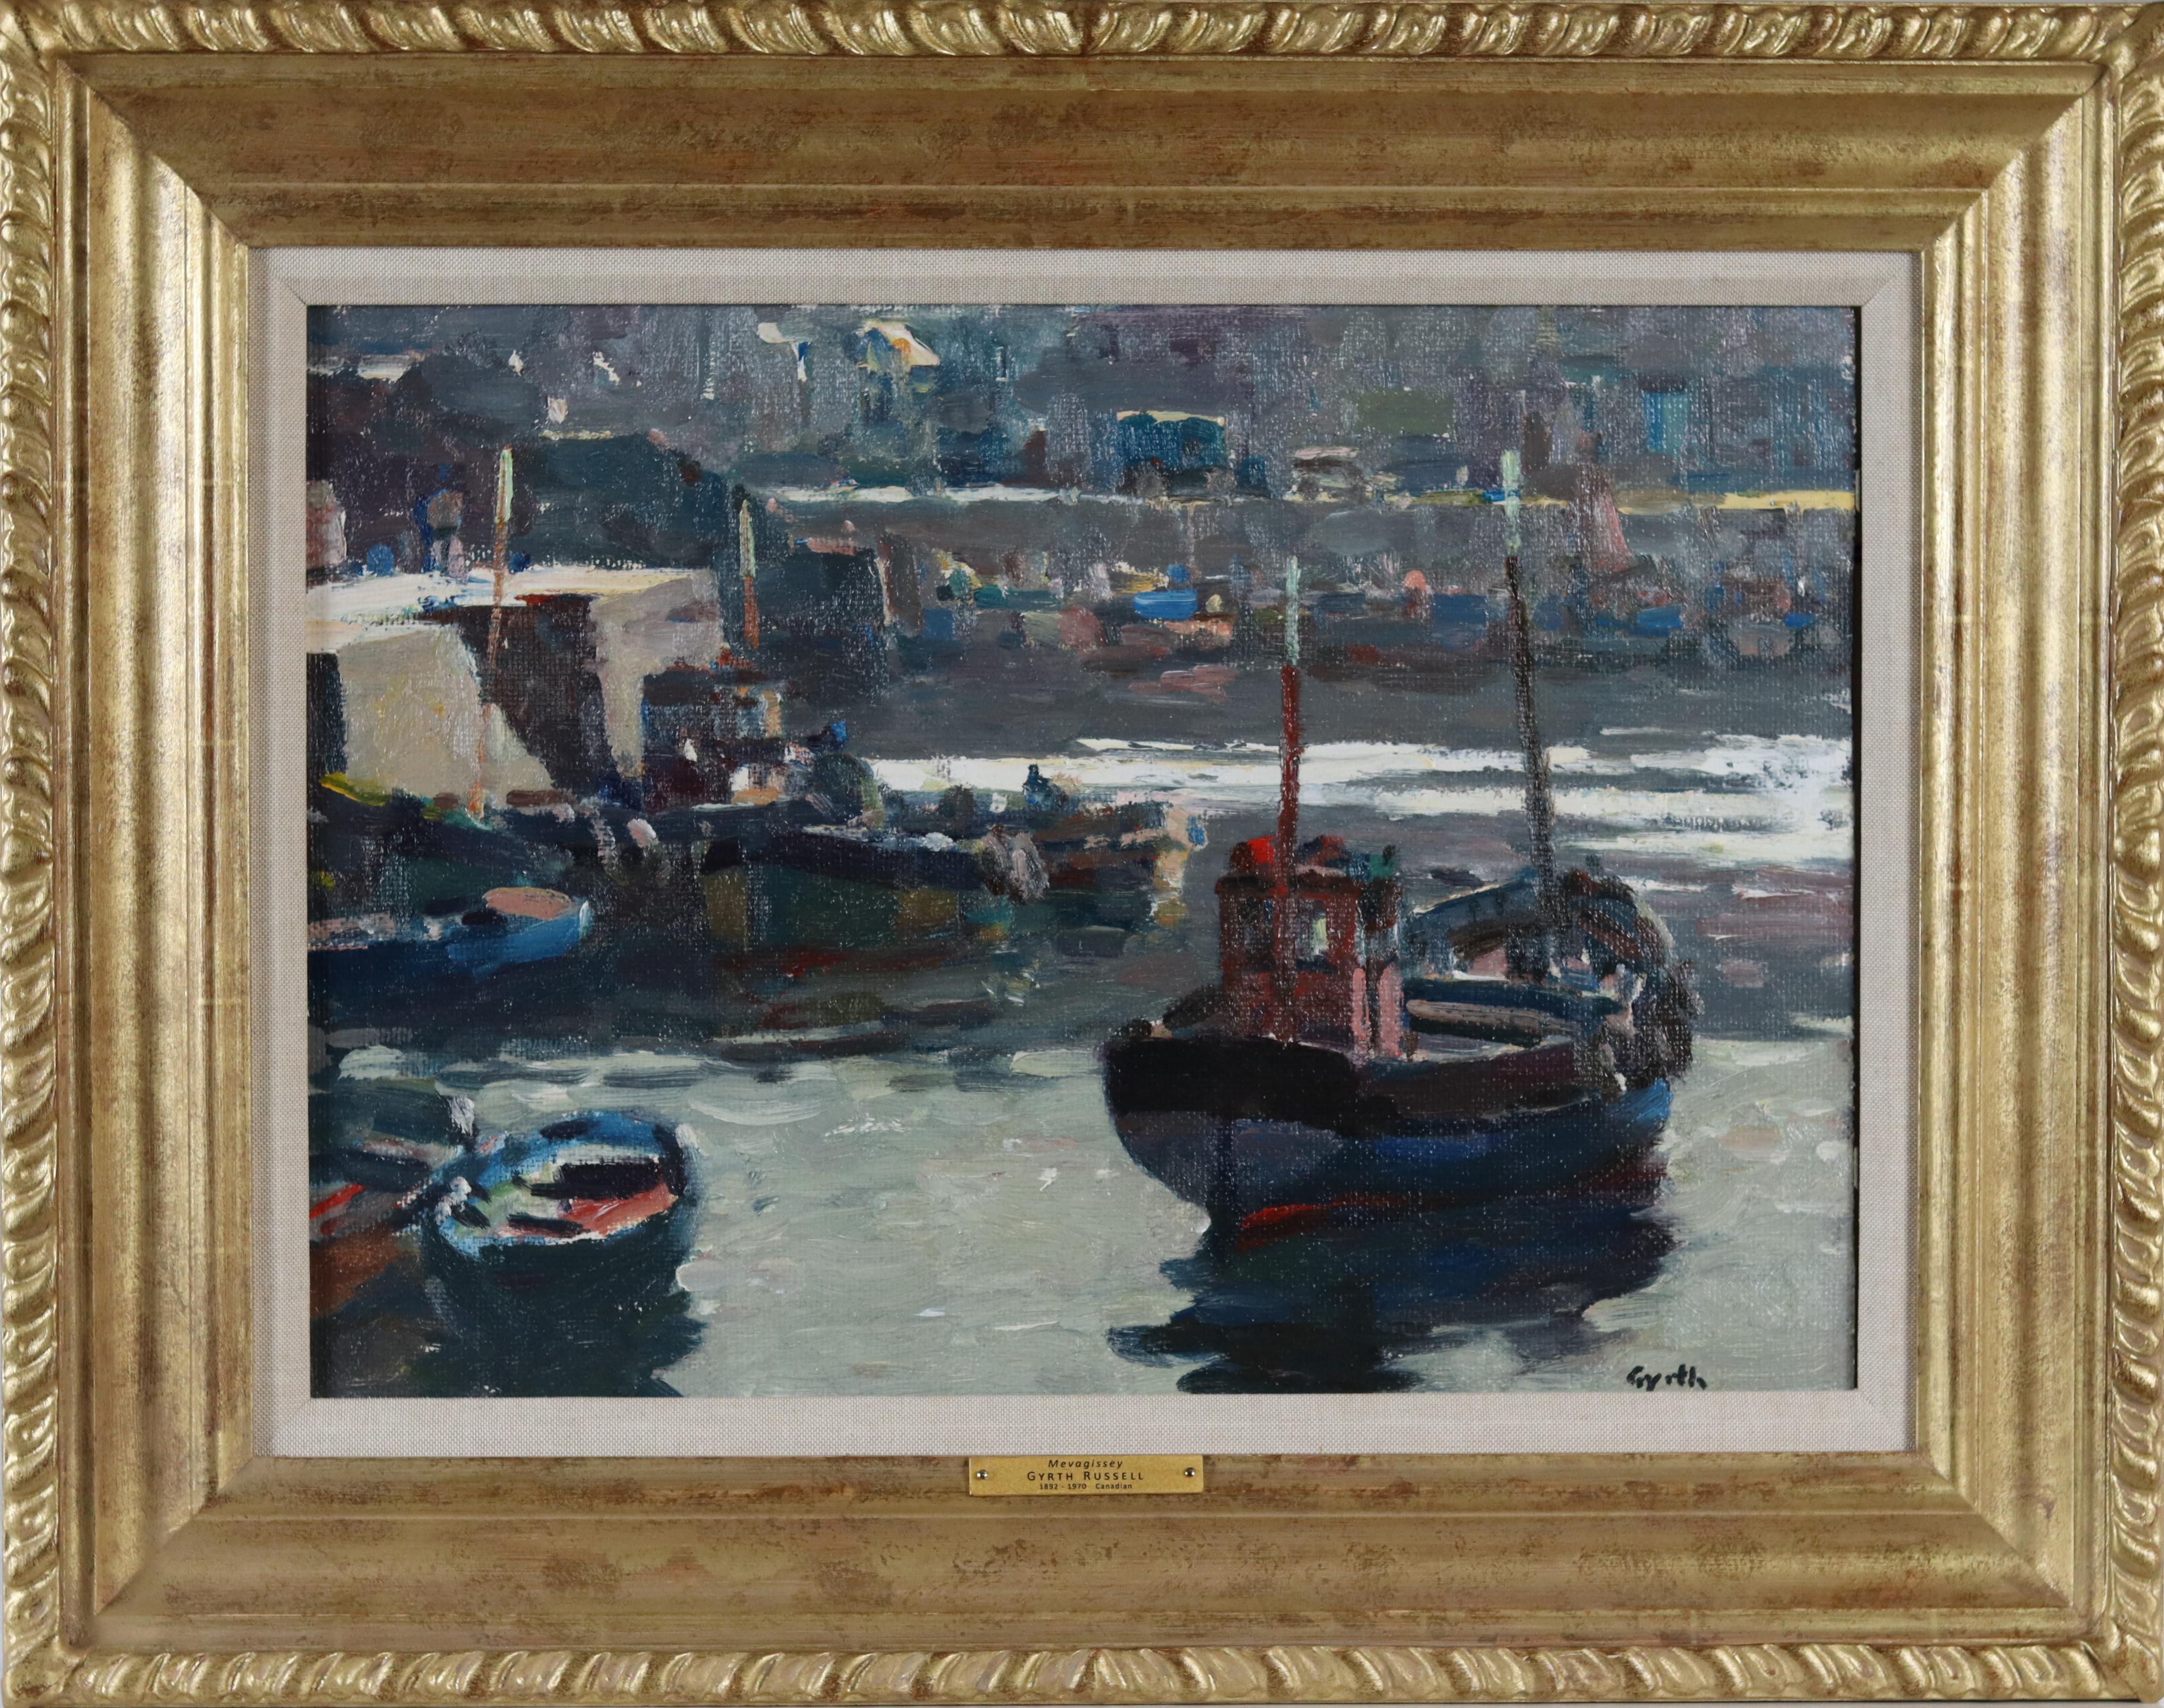 Gyrth Russell Landscape Painting - Sunlit Waters in Mevagissey, Cornwall